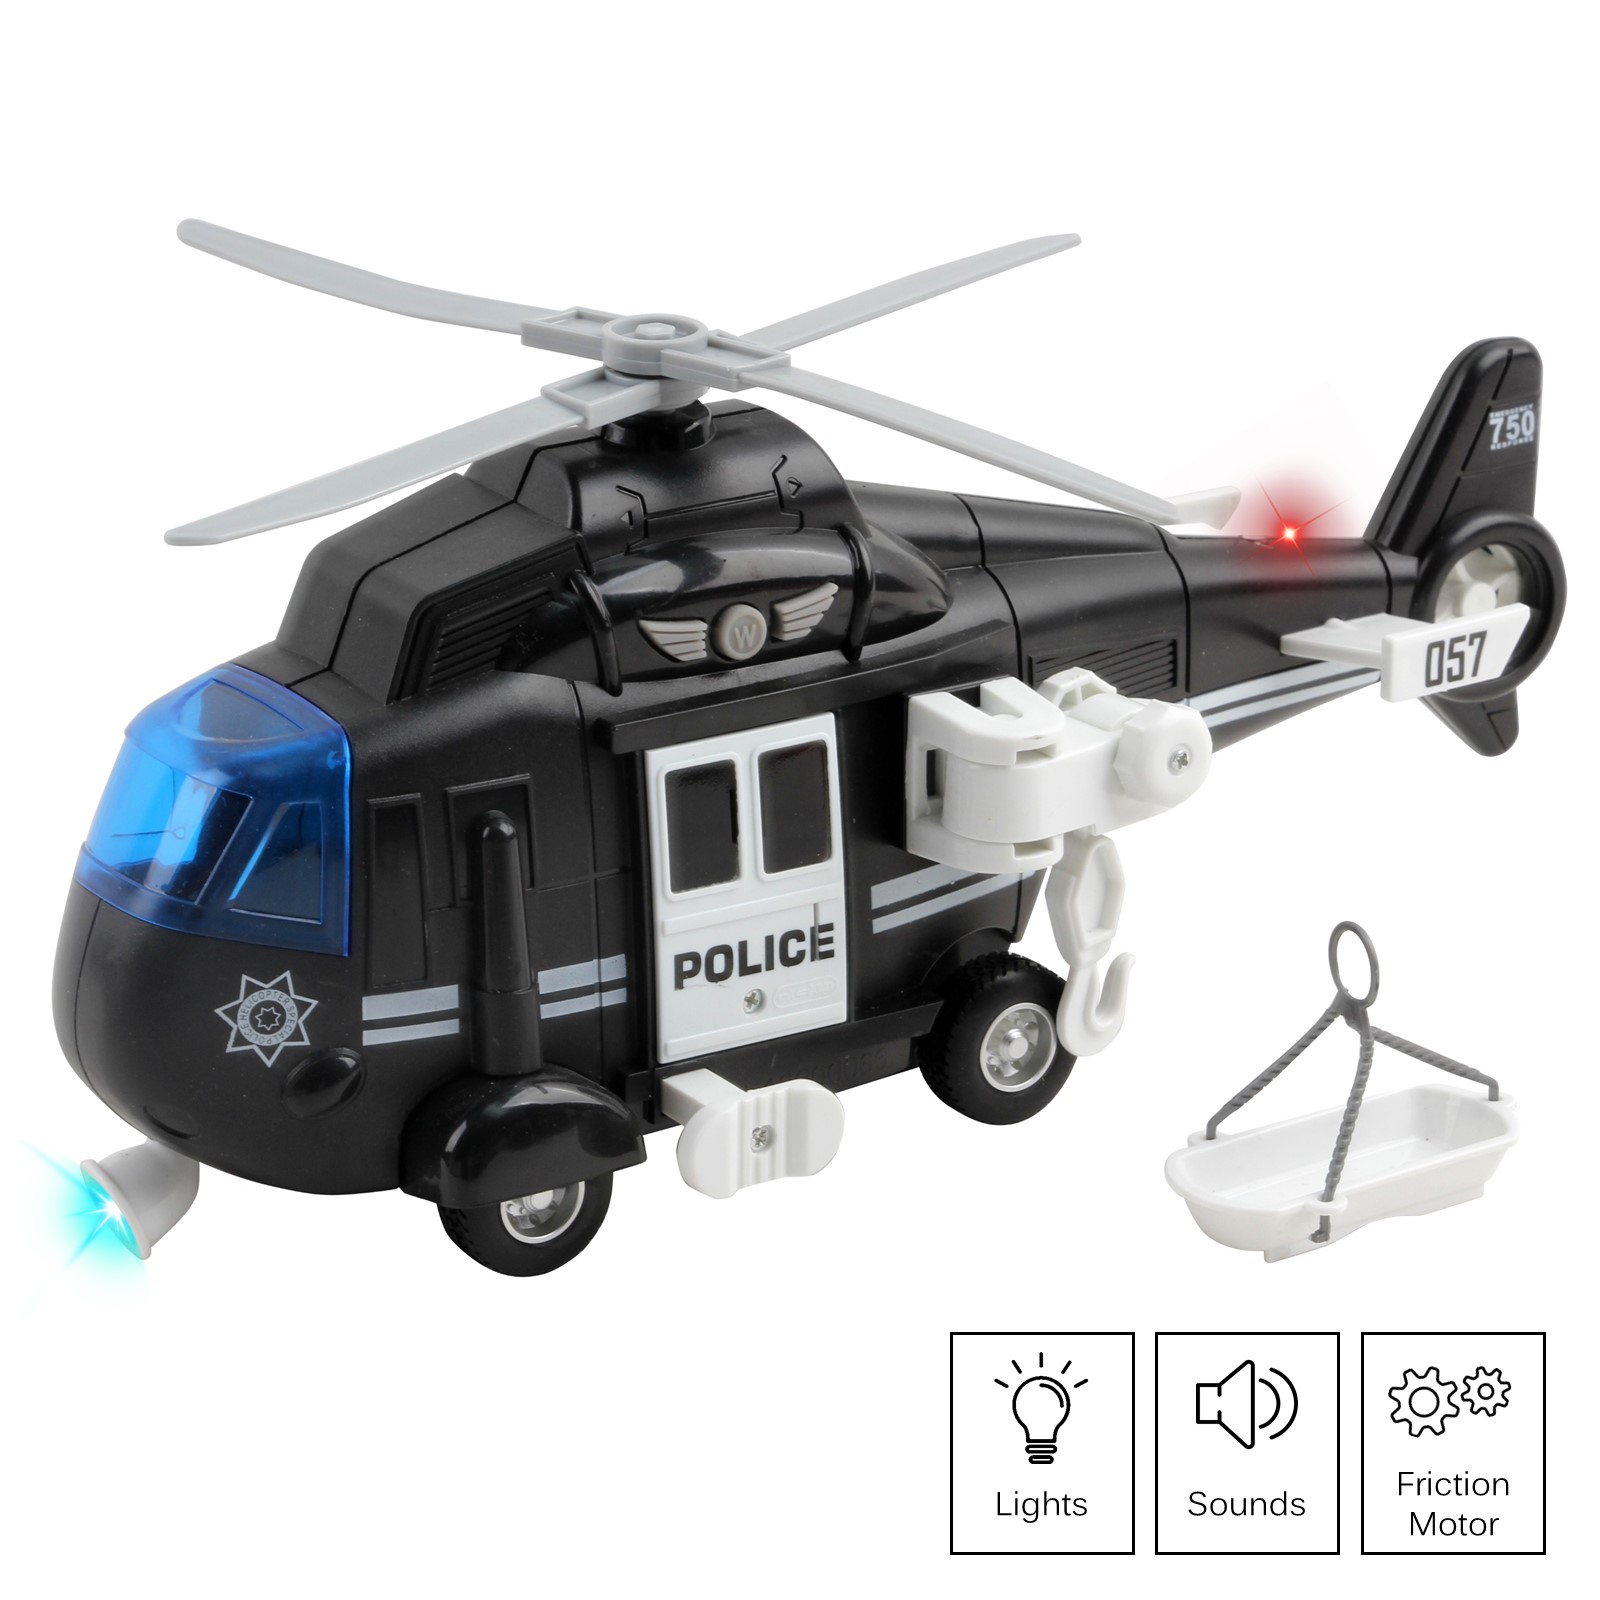 Vokodo Police Helicopter 11 With Lights Sounds Push And Go Includes Rescue Basket Durable 1:16 Scale Friction Kids SWAT Chopper Pretend Play Cop Airplane Toy Great Gift For Children Boy Girl Toddlers